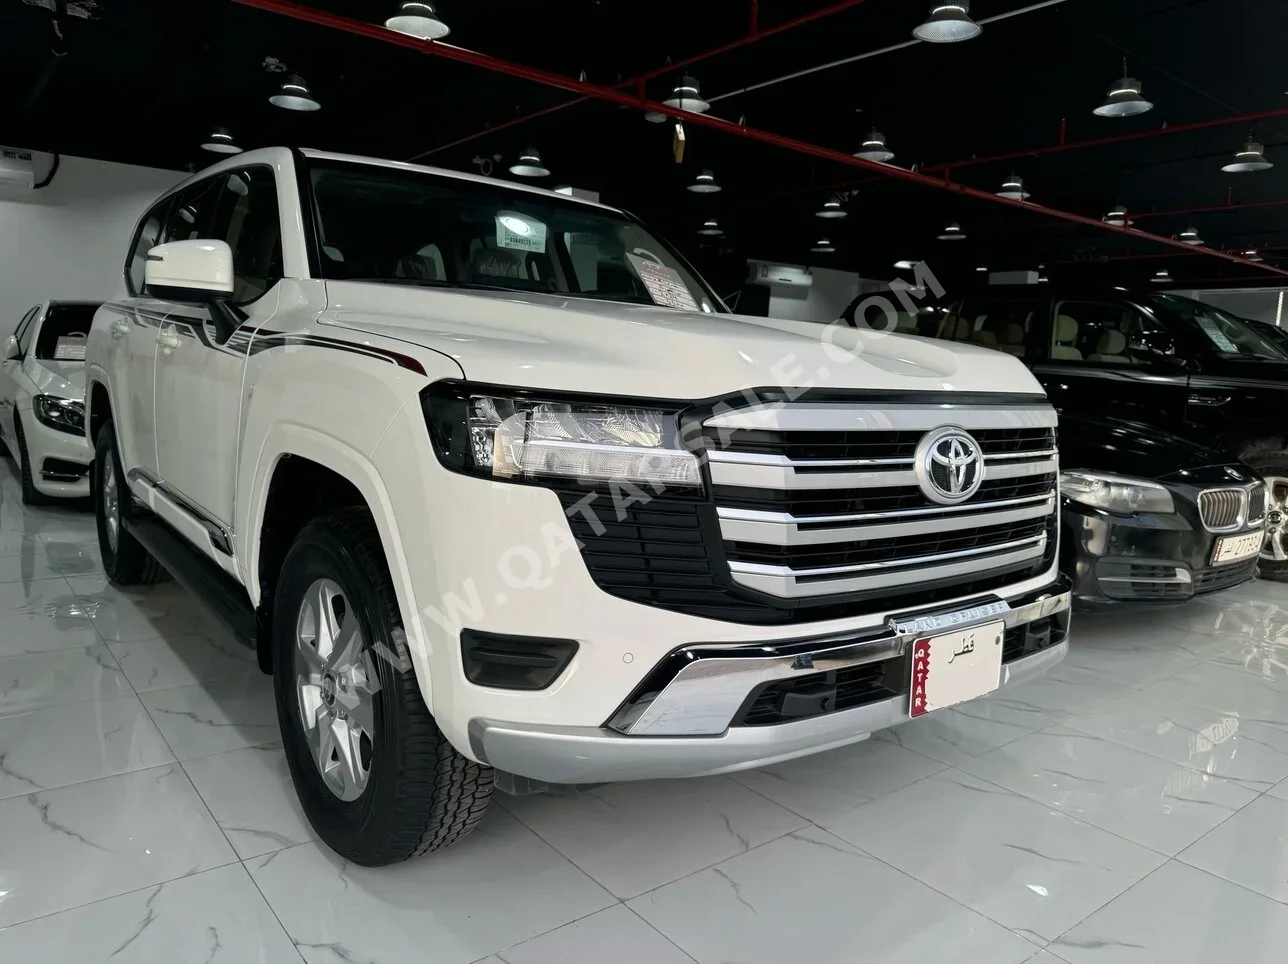 Toyota  Land Cruiser  GXR  2024  Automatic  5,500 Km  6 Cylinder  Four Wheel Drive (4WD)  SUV  White  With Warranty